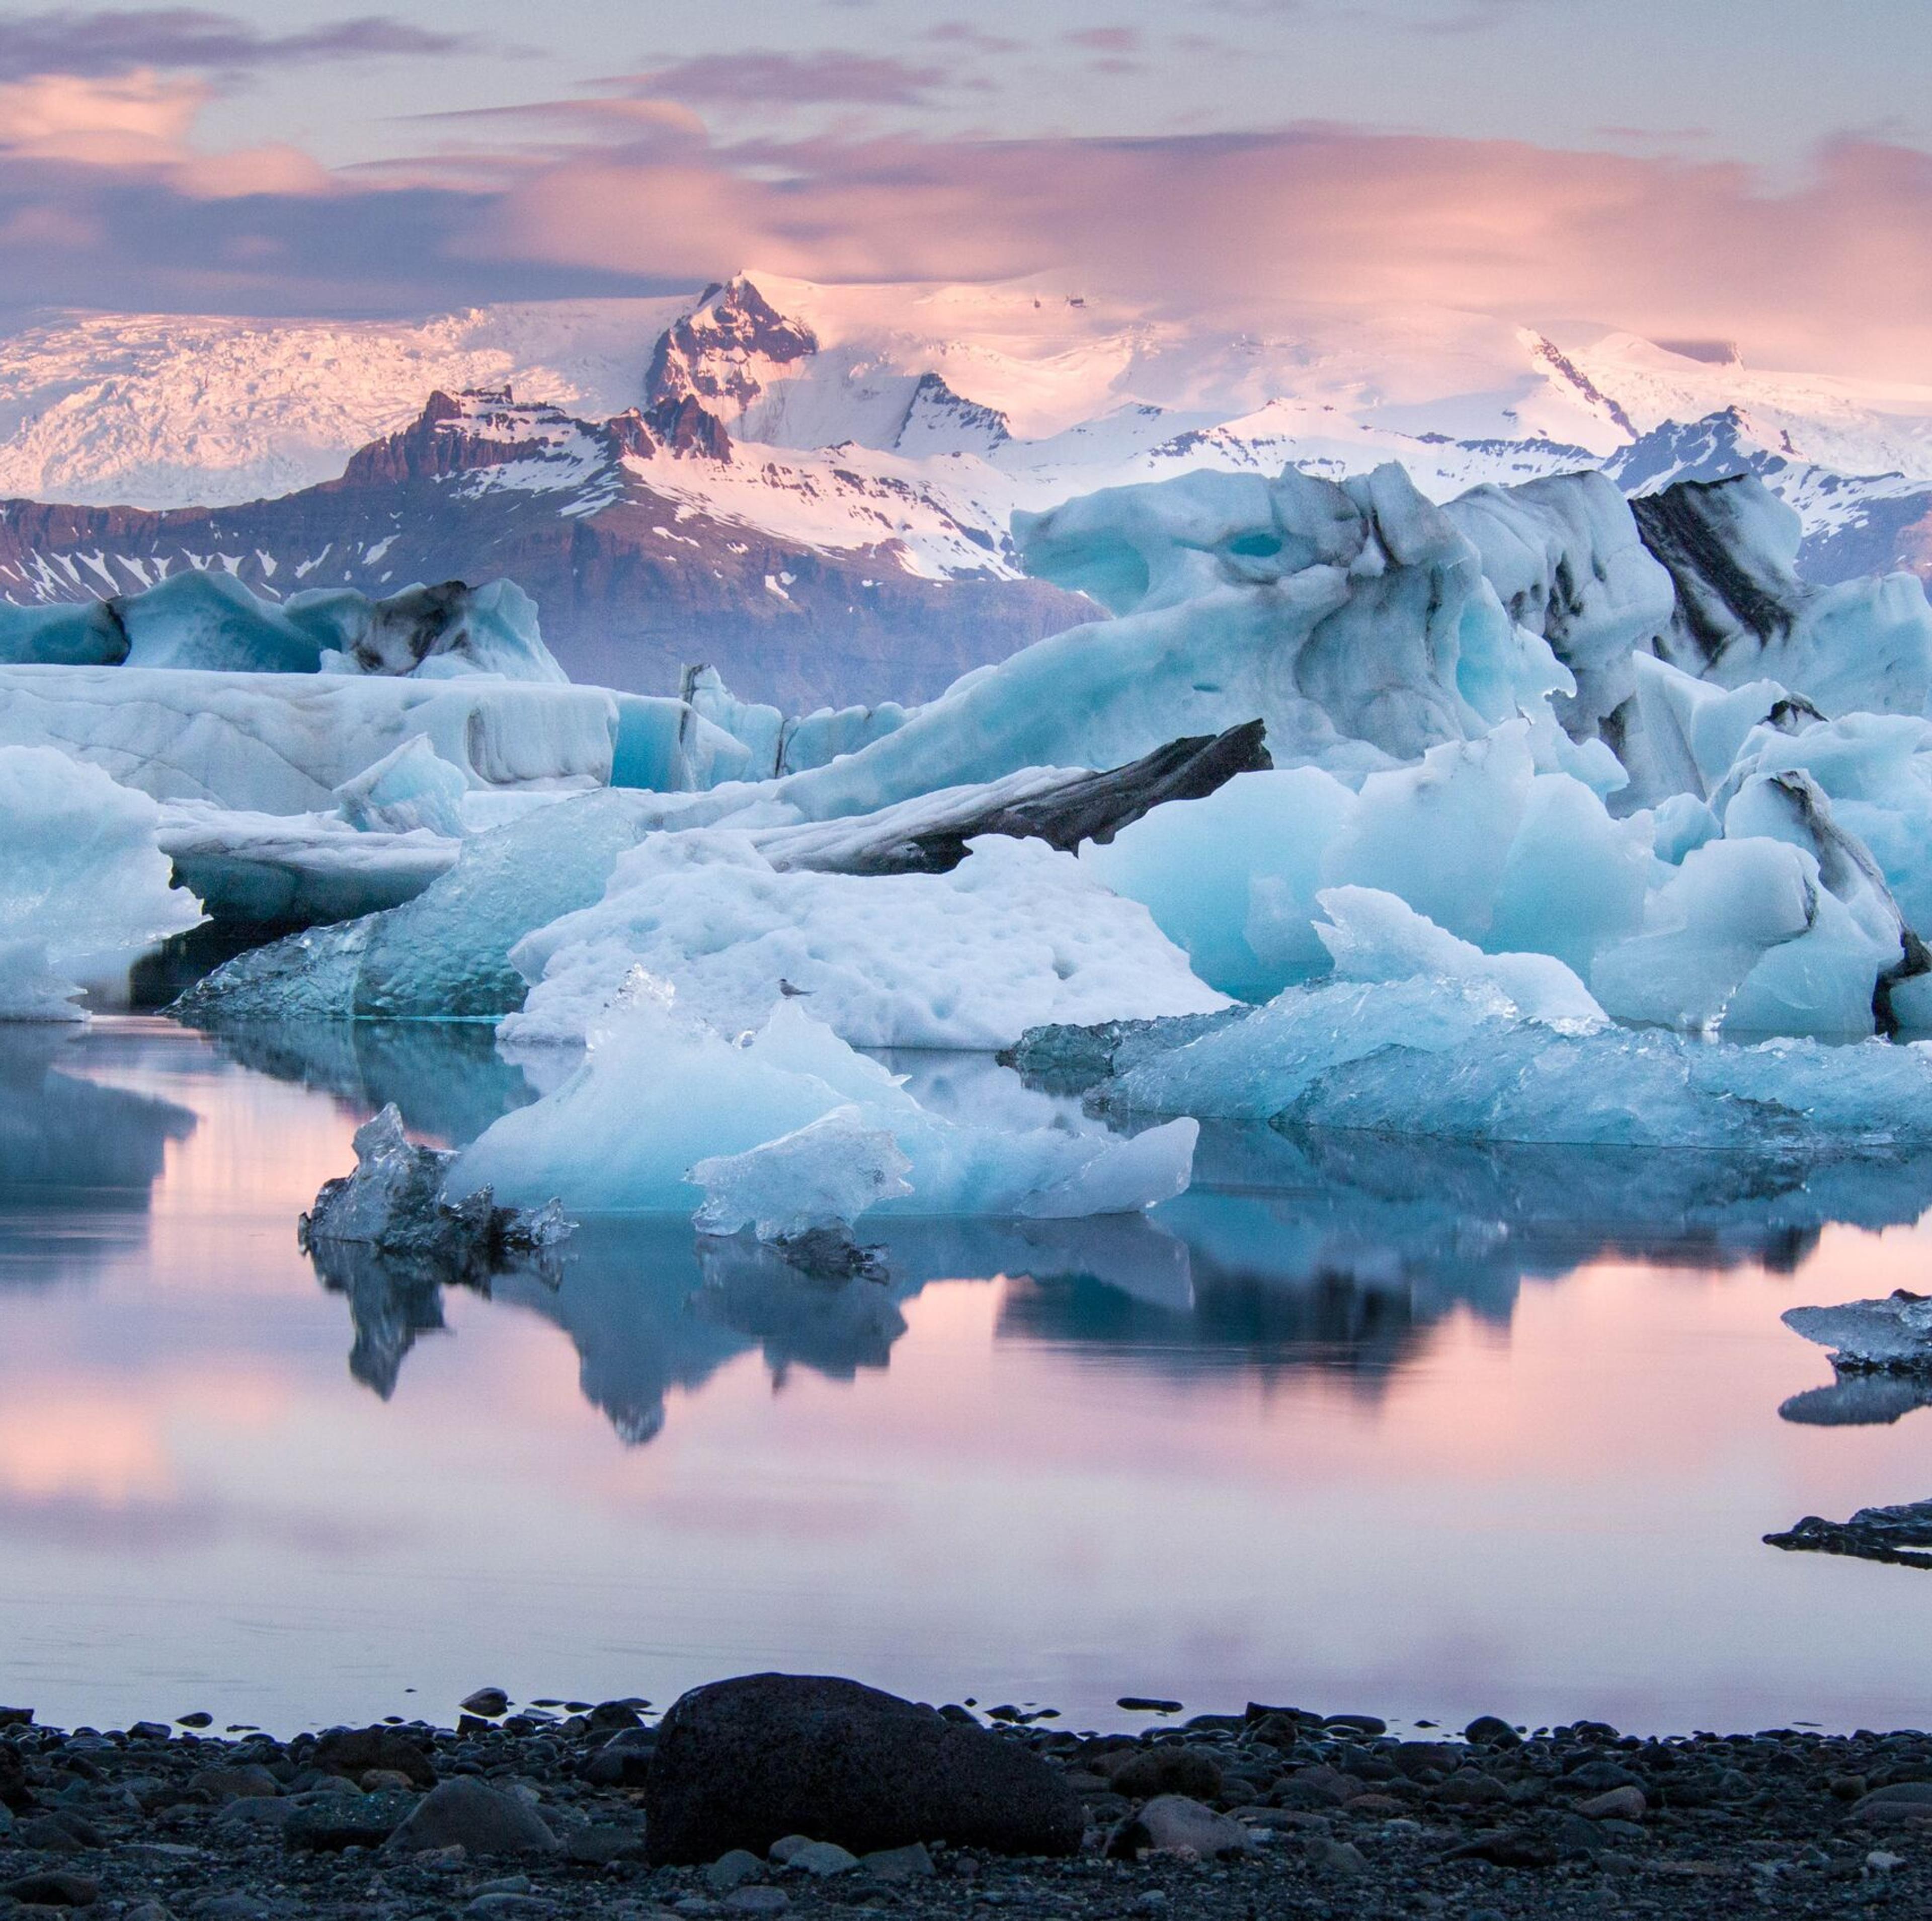 Jökulsárlón lagoon during sunset. Floating icebergs and a mountain on the background.